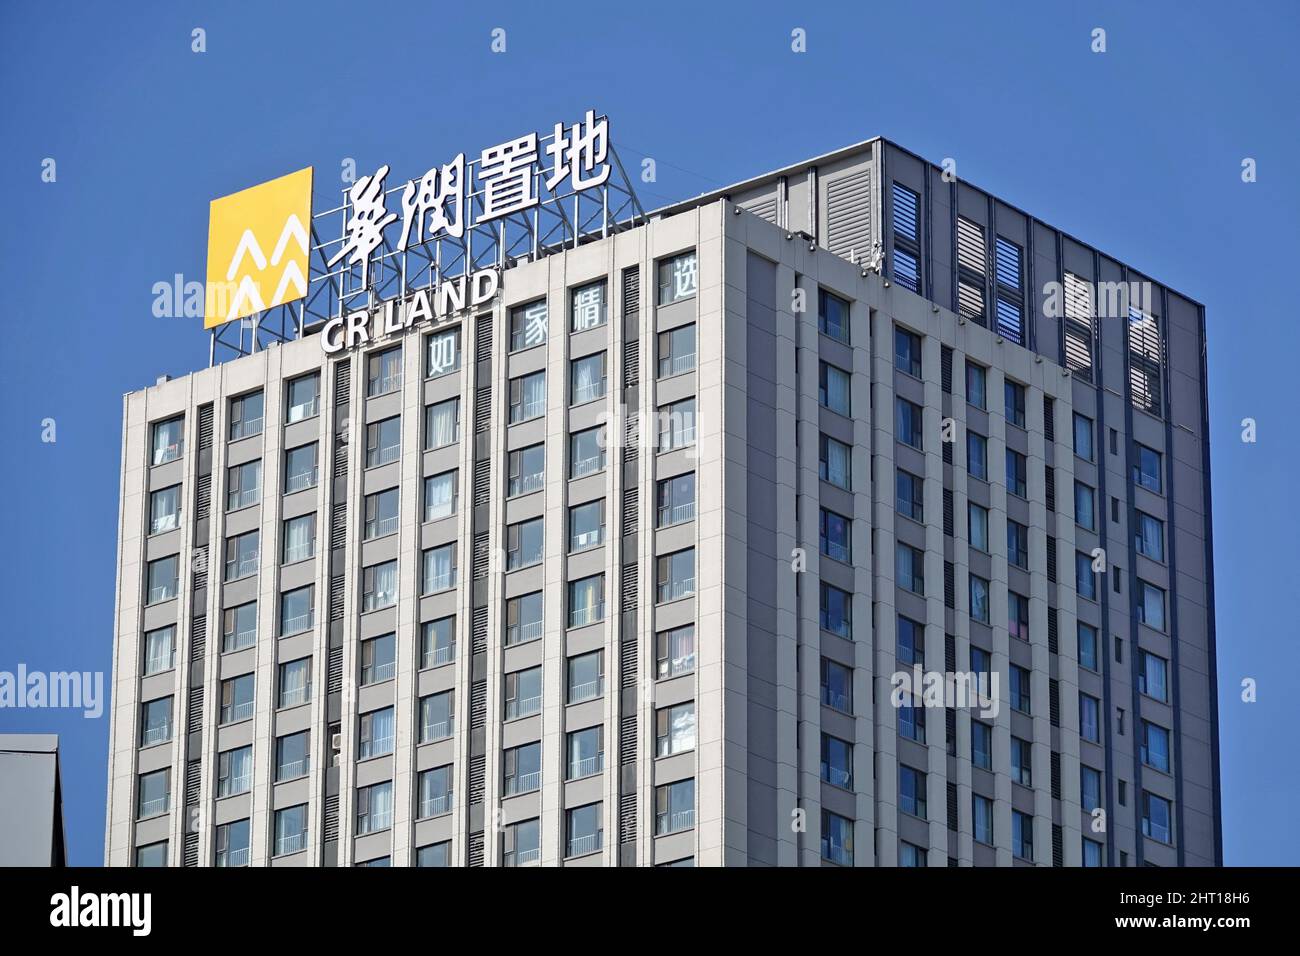 YANTAI, CHINA - FEBRUARY 26, 2022 - A view of the China Resources Land office building in Yantai, Shandong Province, China, February 26, 2022. Accordi Stock Photo